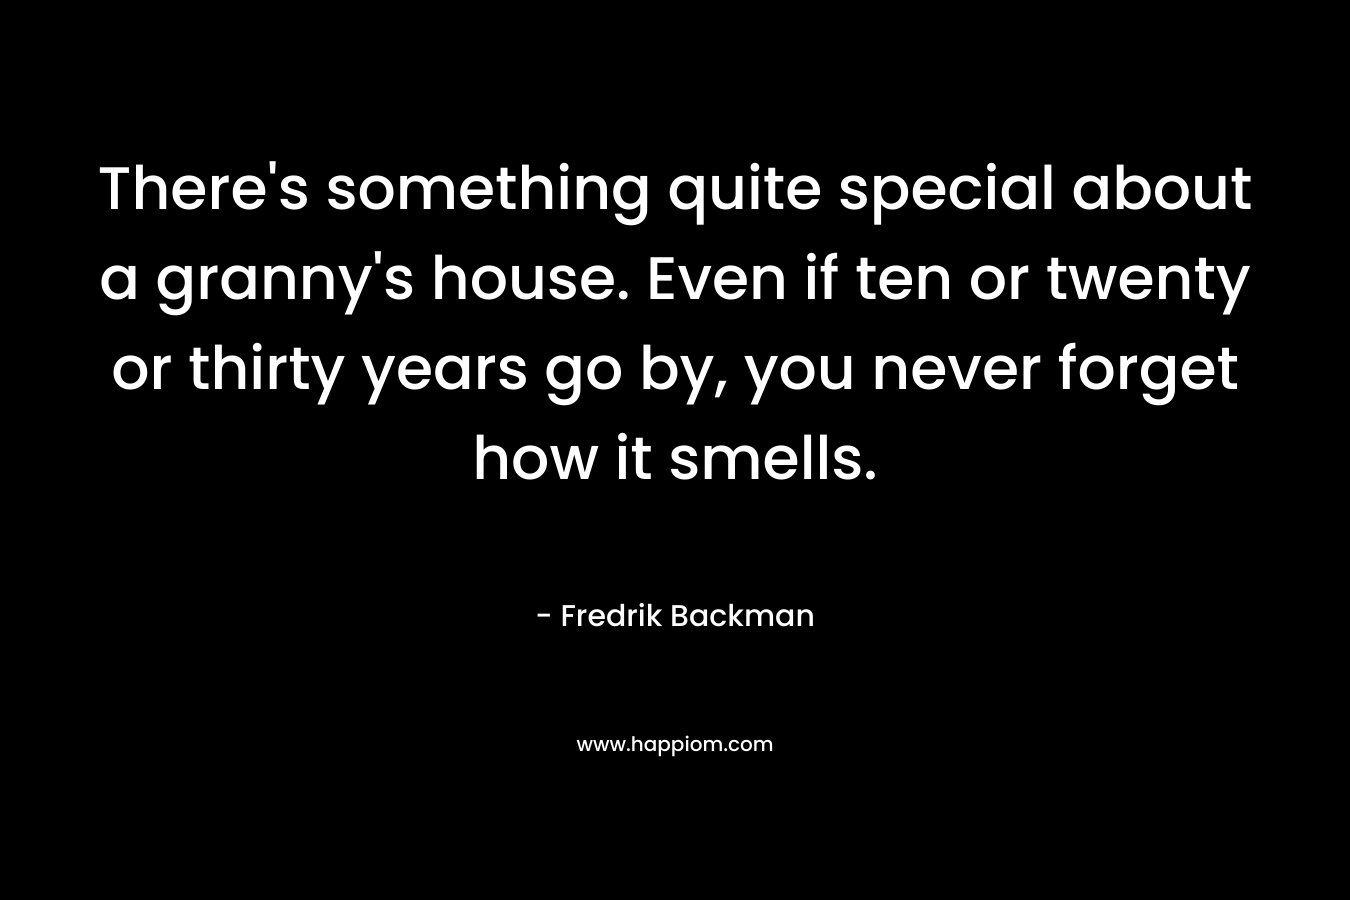 There's something quite special about a granny's house. Even if ten or twenty or thirty years go by, you never forget how it smells.